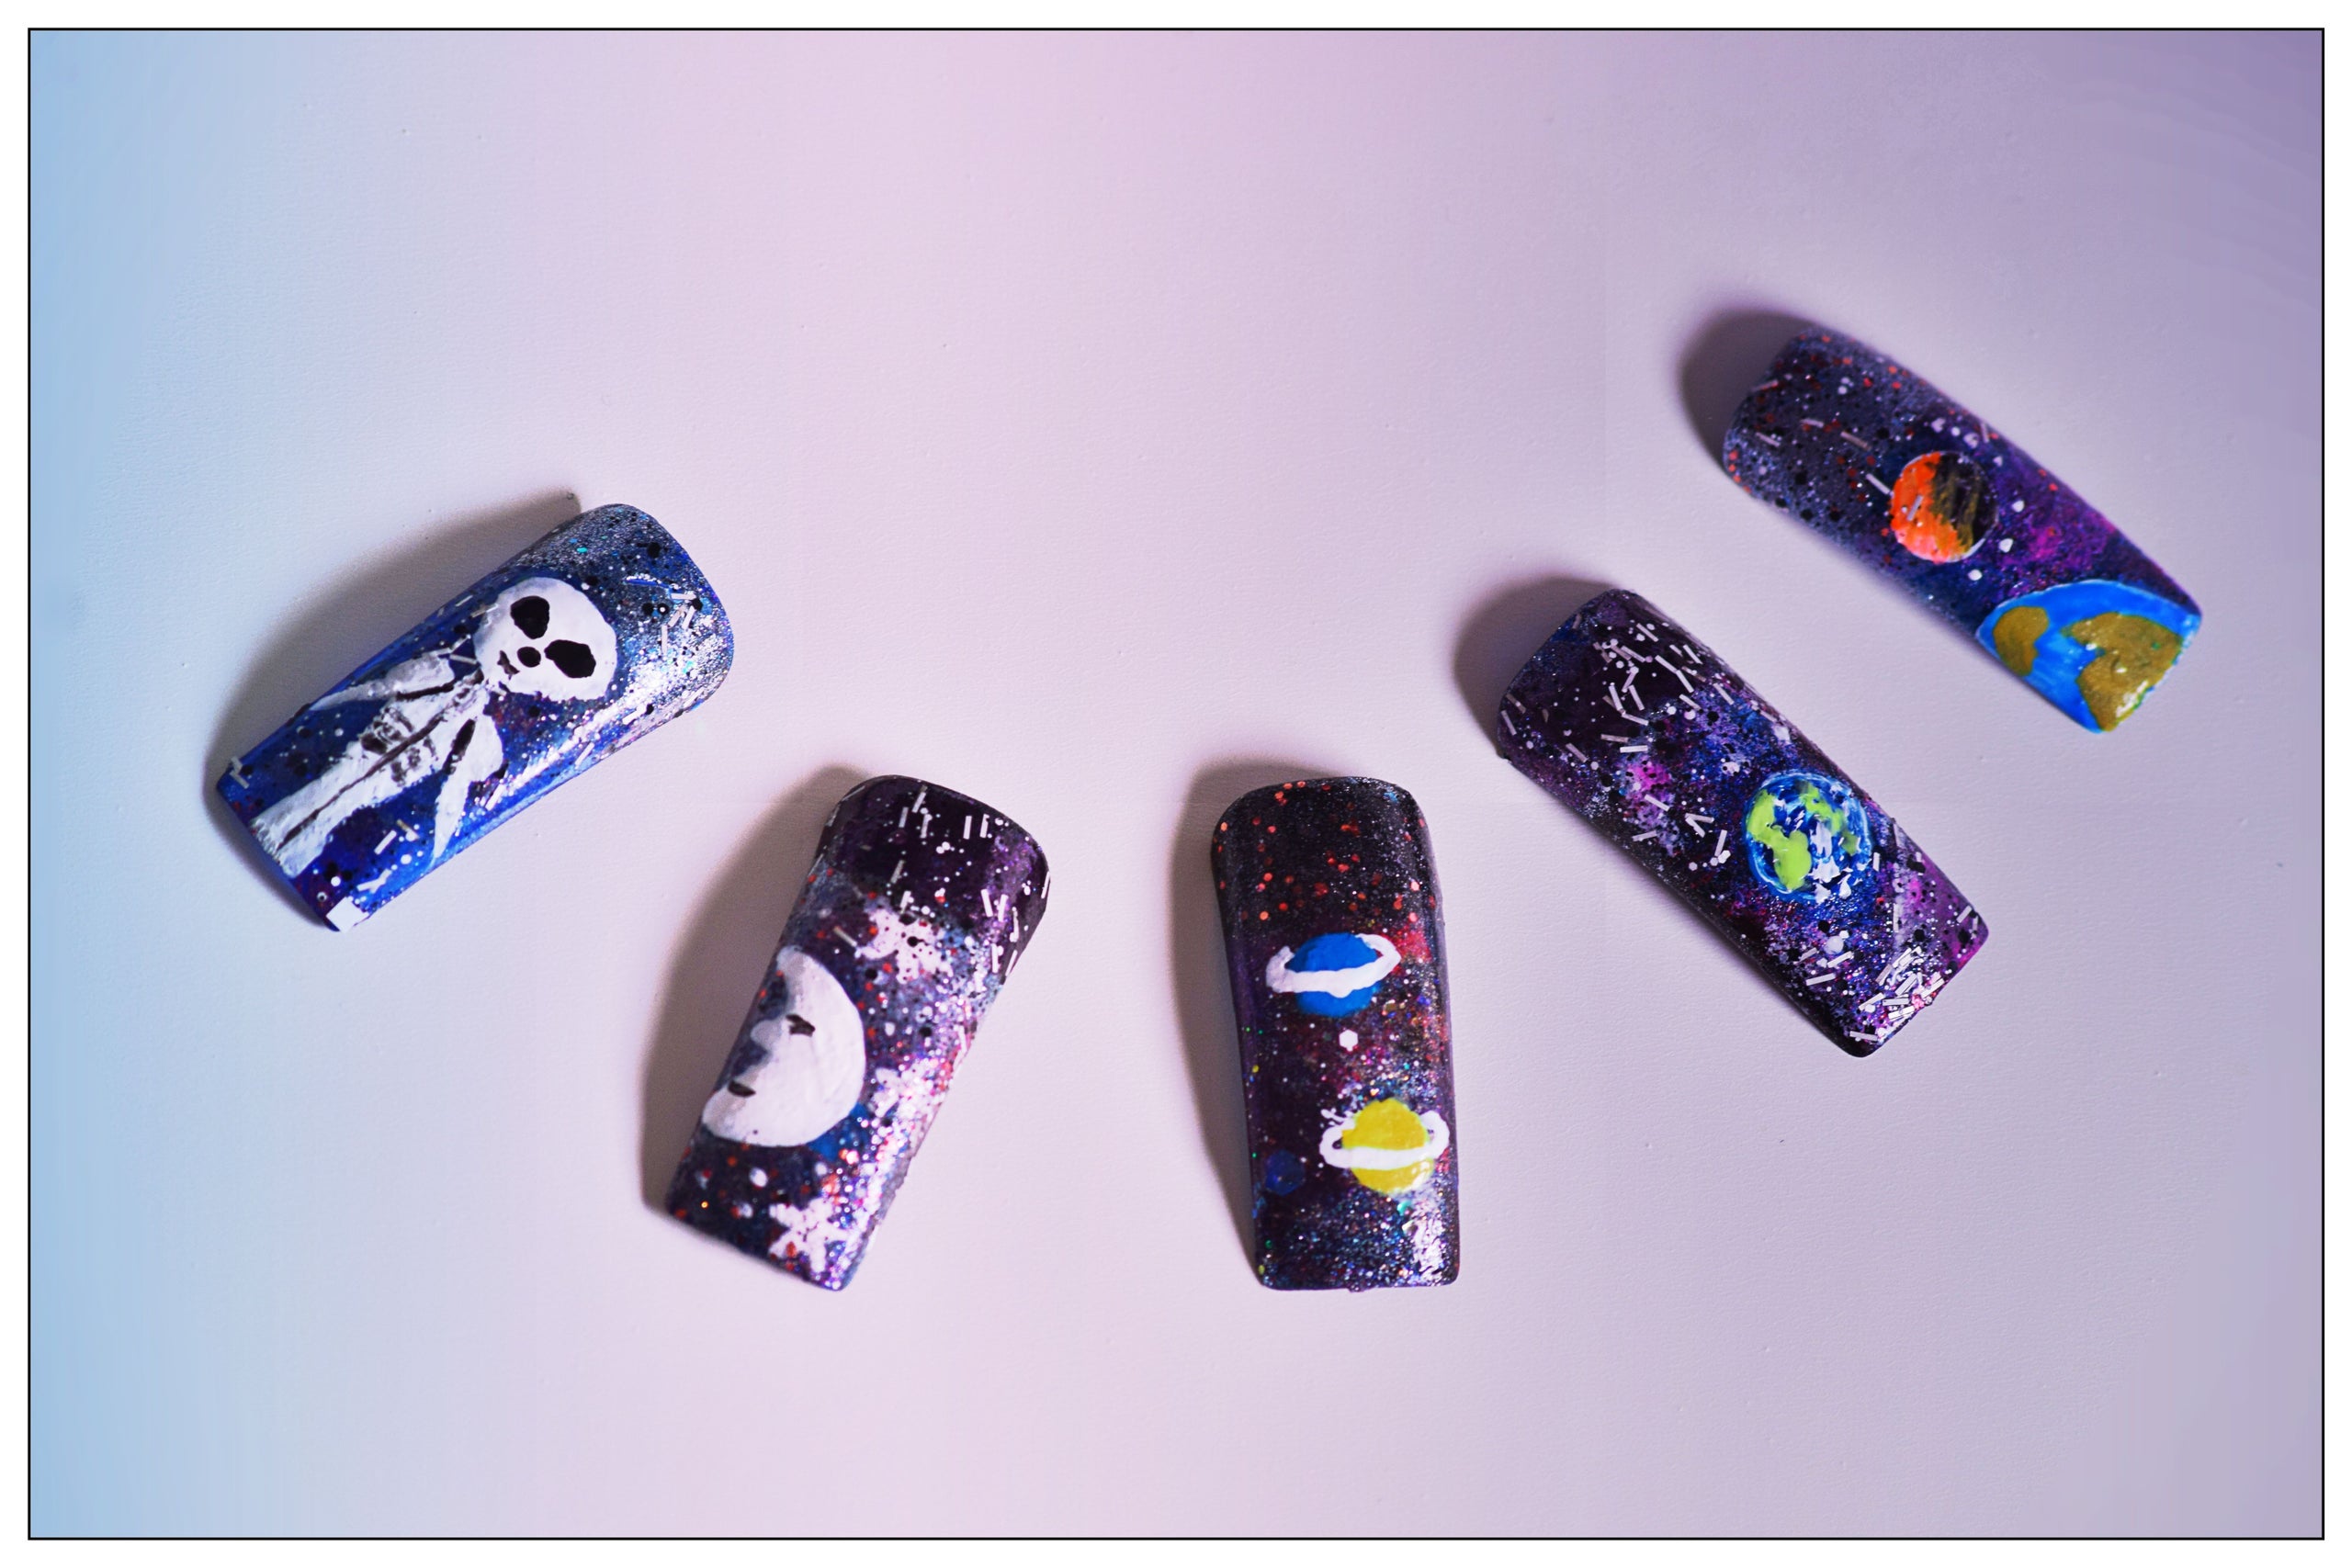 Virtual Nail Art Training in Lahore
9. Nail Art Classes Near Me in Lahore - wide 10